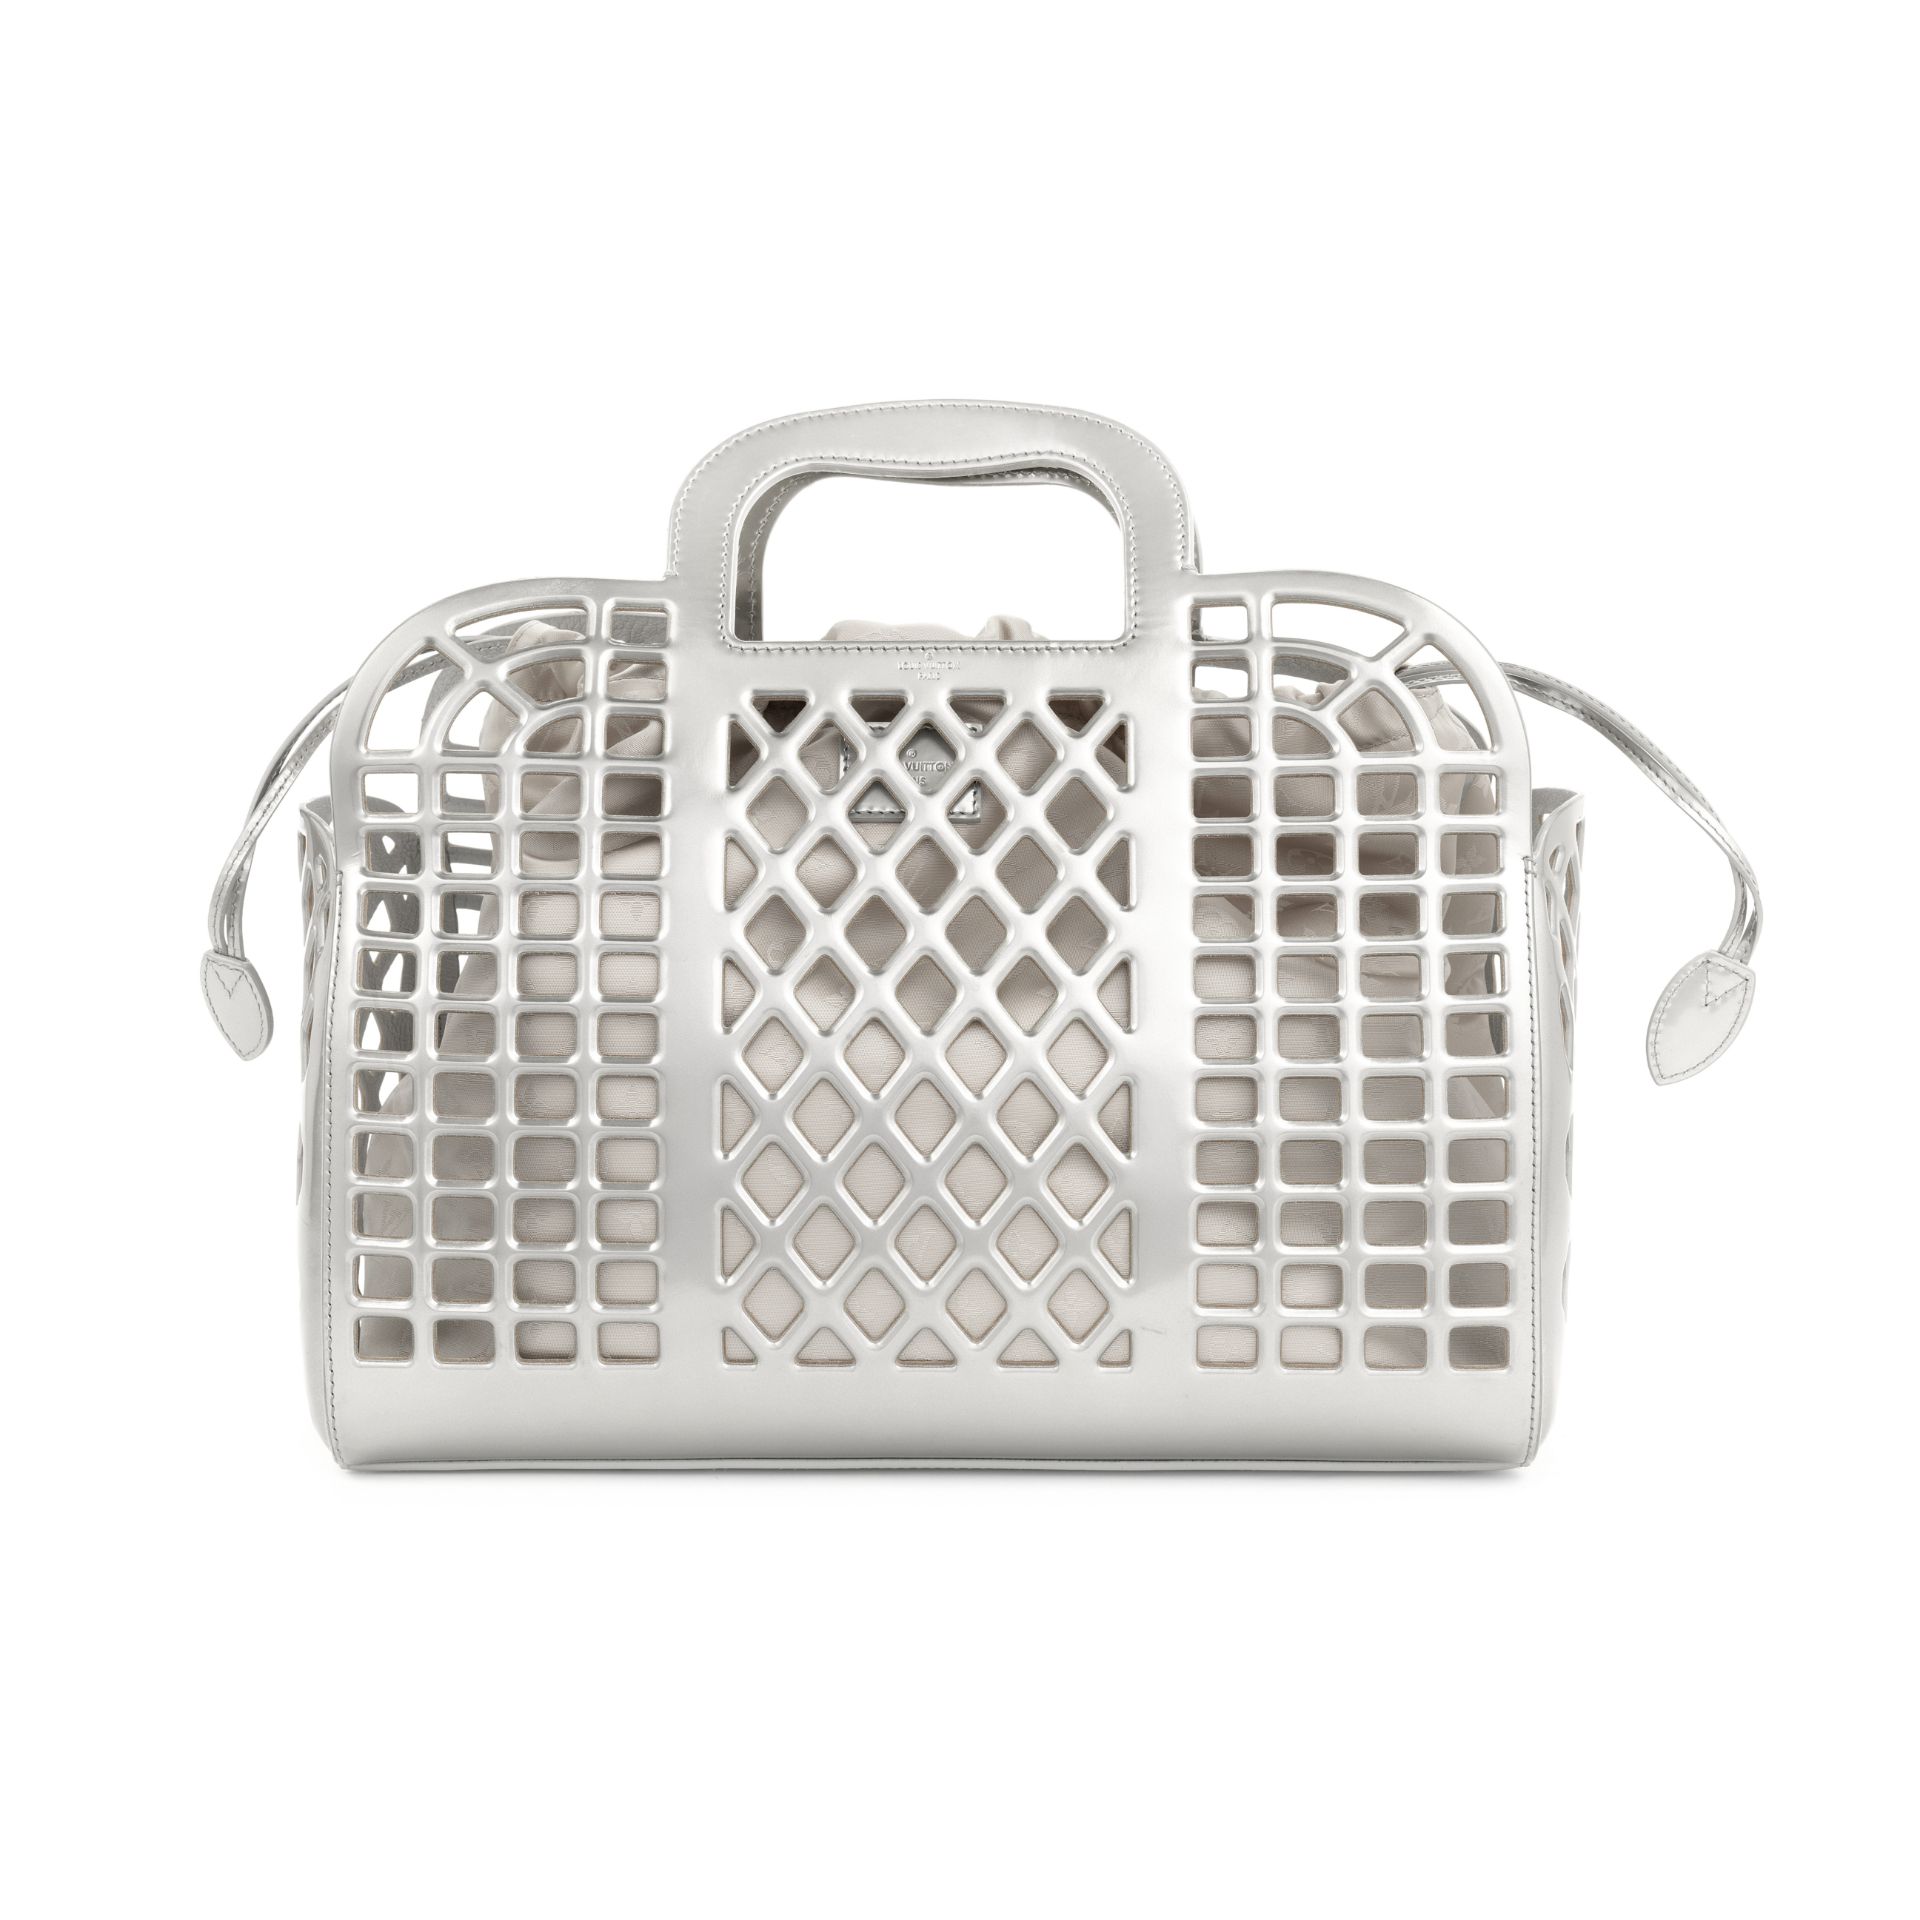 Silver Jelly MM Tote, Louis Vuitton, Spring/Summer 2012, (Includes dust bag)